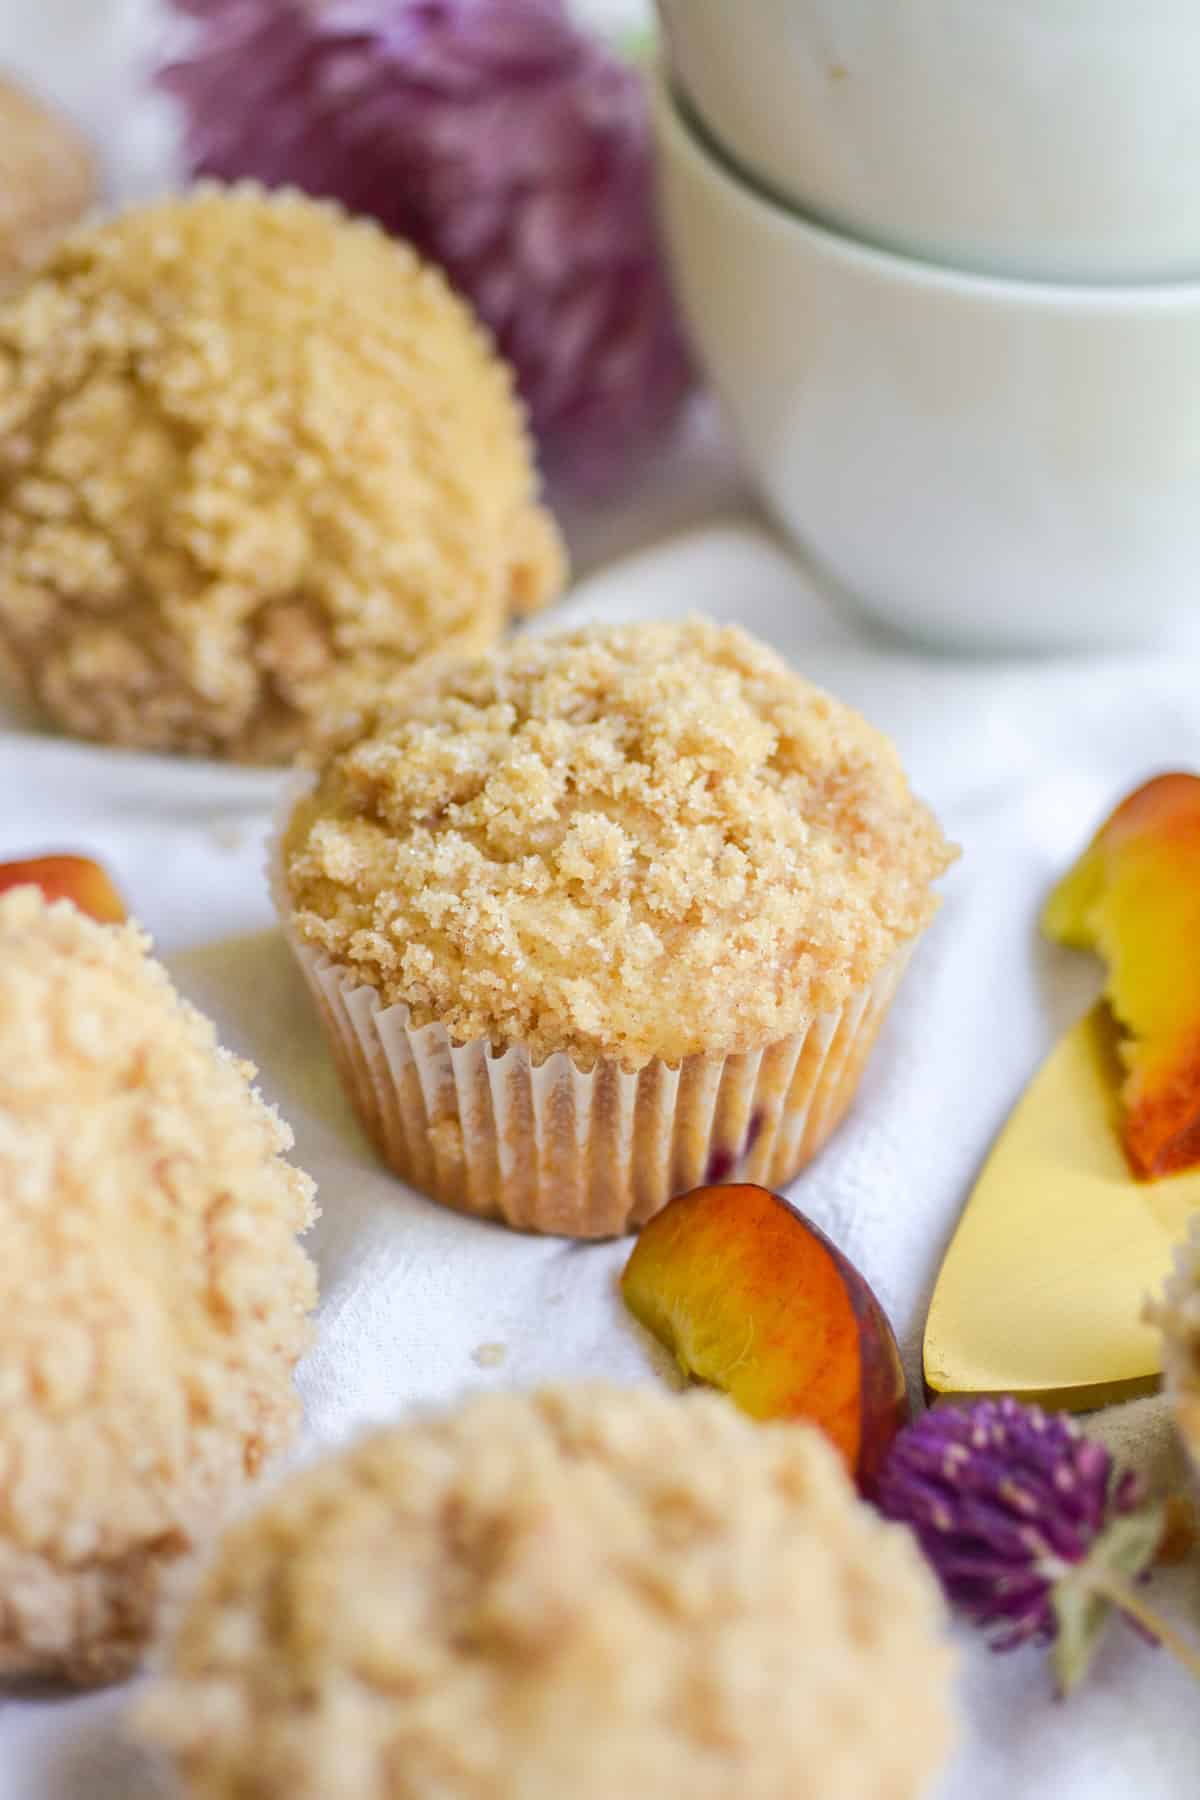 Muffins on a white cloth with peaches in the foreground